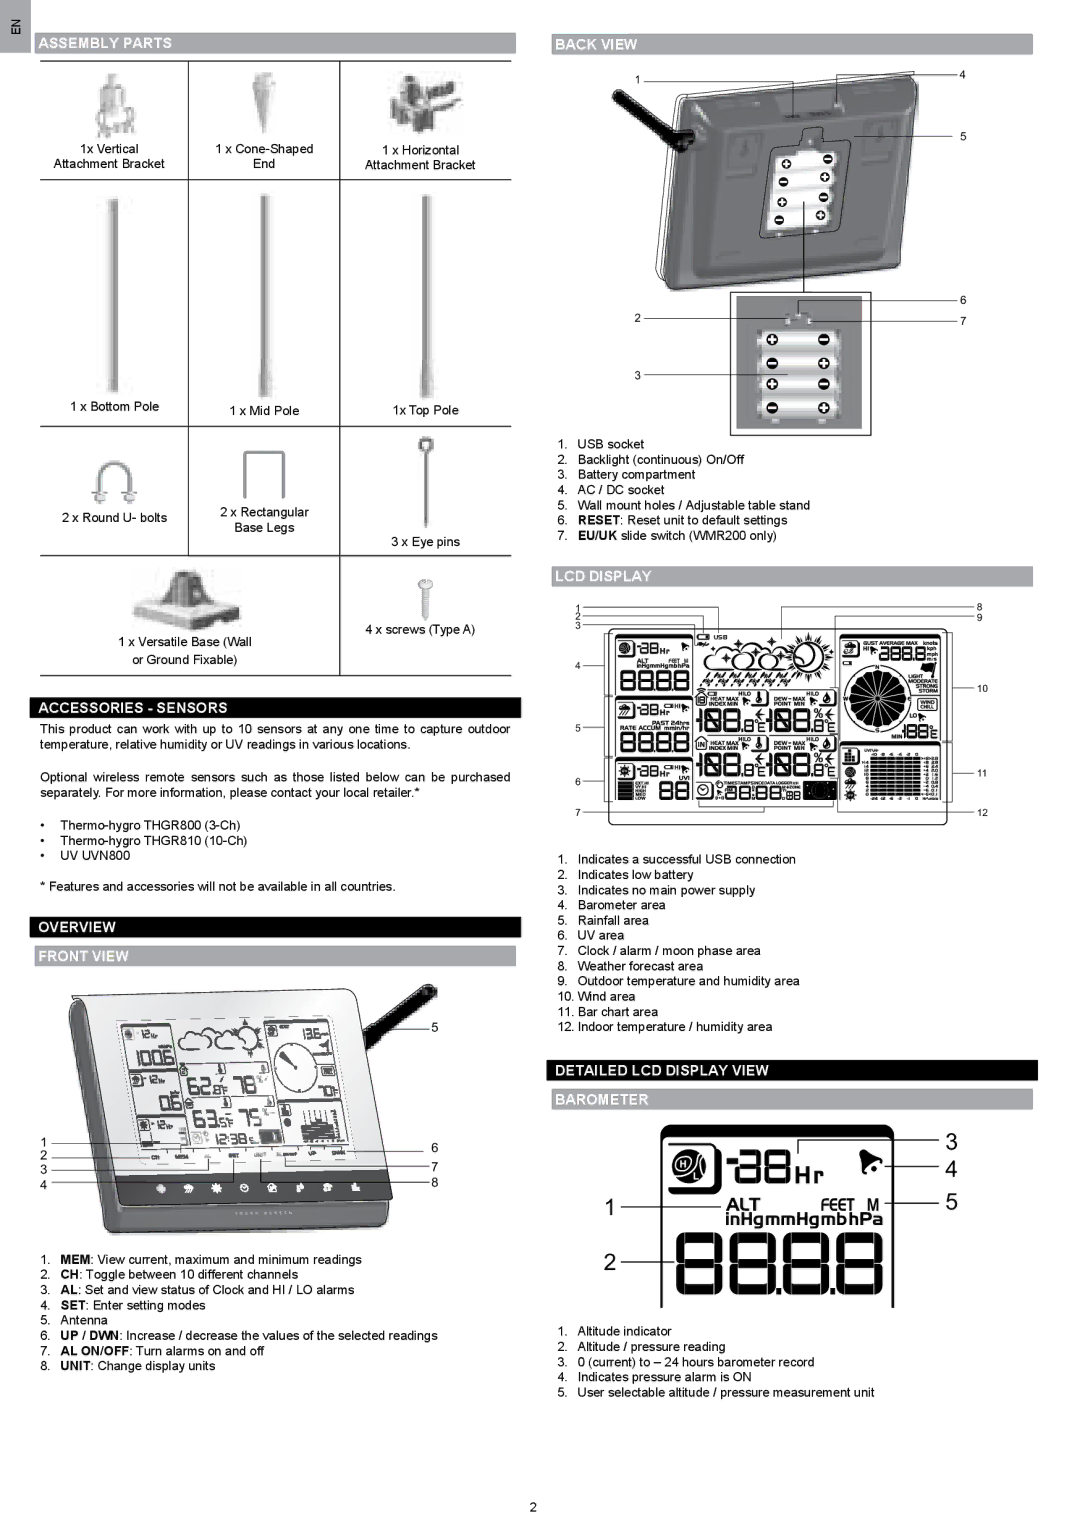 Oregon Scientific WMR200 manual Assembly Parts, Accessories Sensors, Overview Front View, Back View, LCD Display 